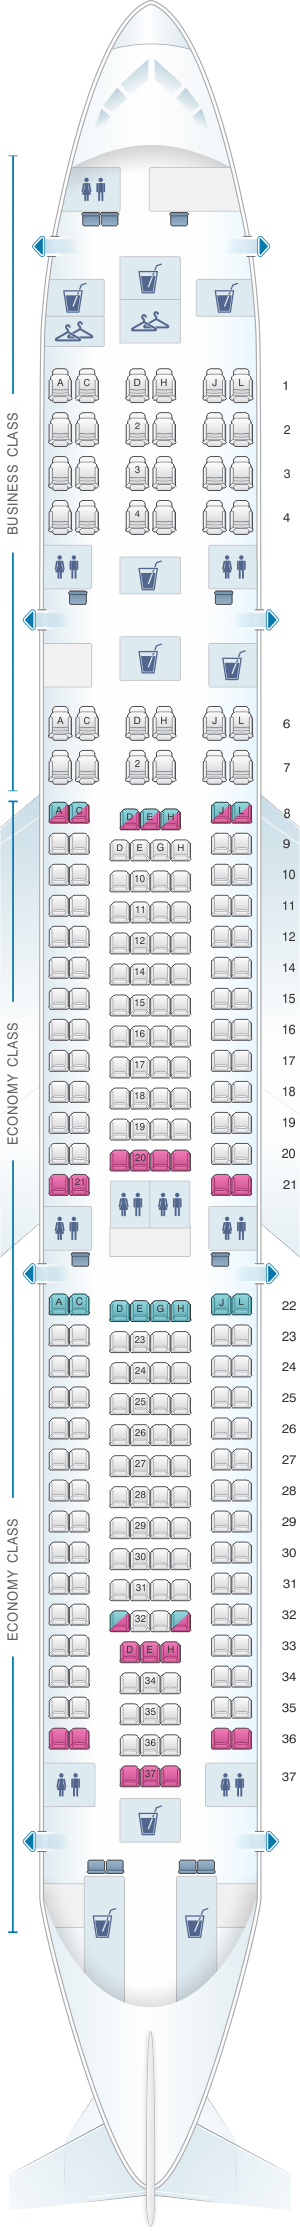 Airbus A340 Turkish Airlines Seating Chart